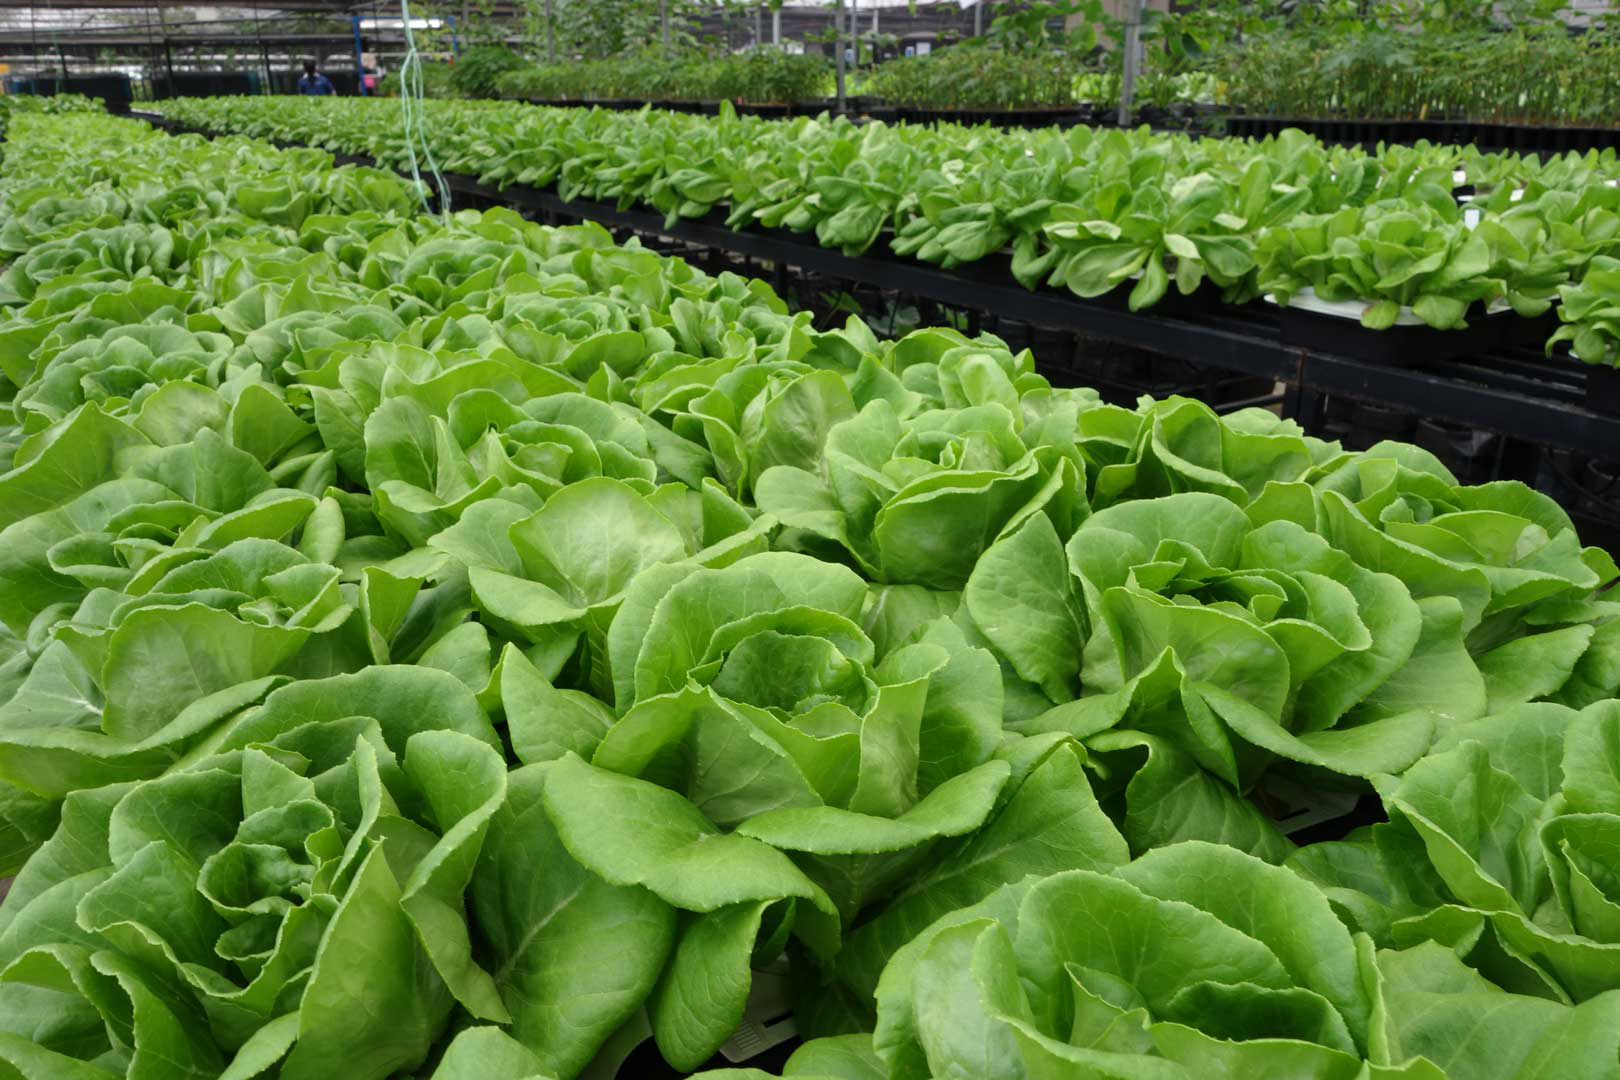 Lettuce Grown Using Our Plant Driven Technology On The Rooftop